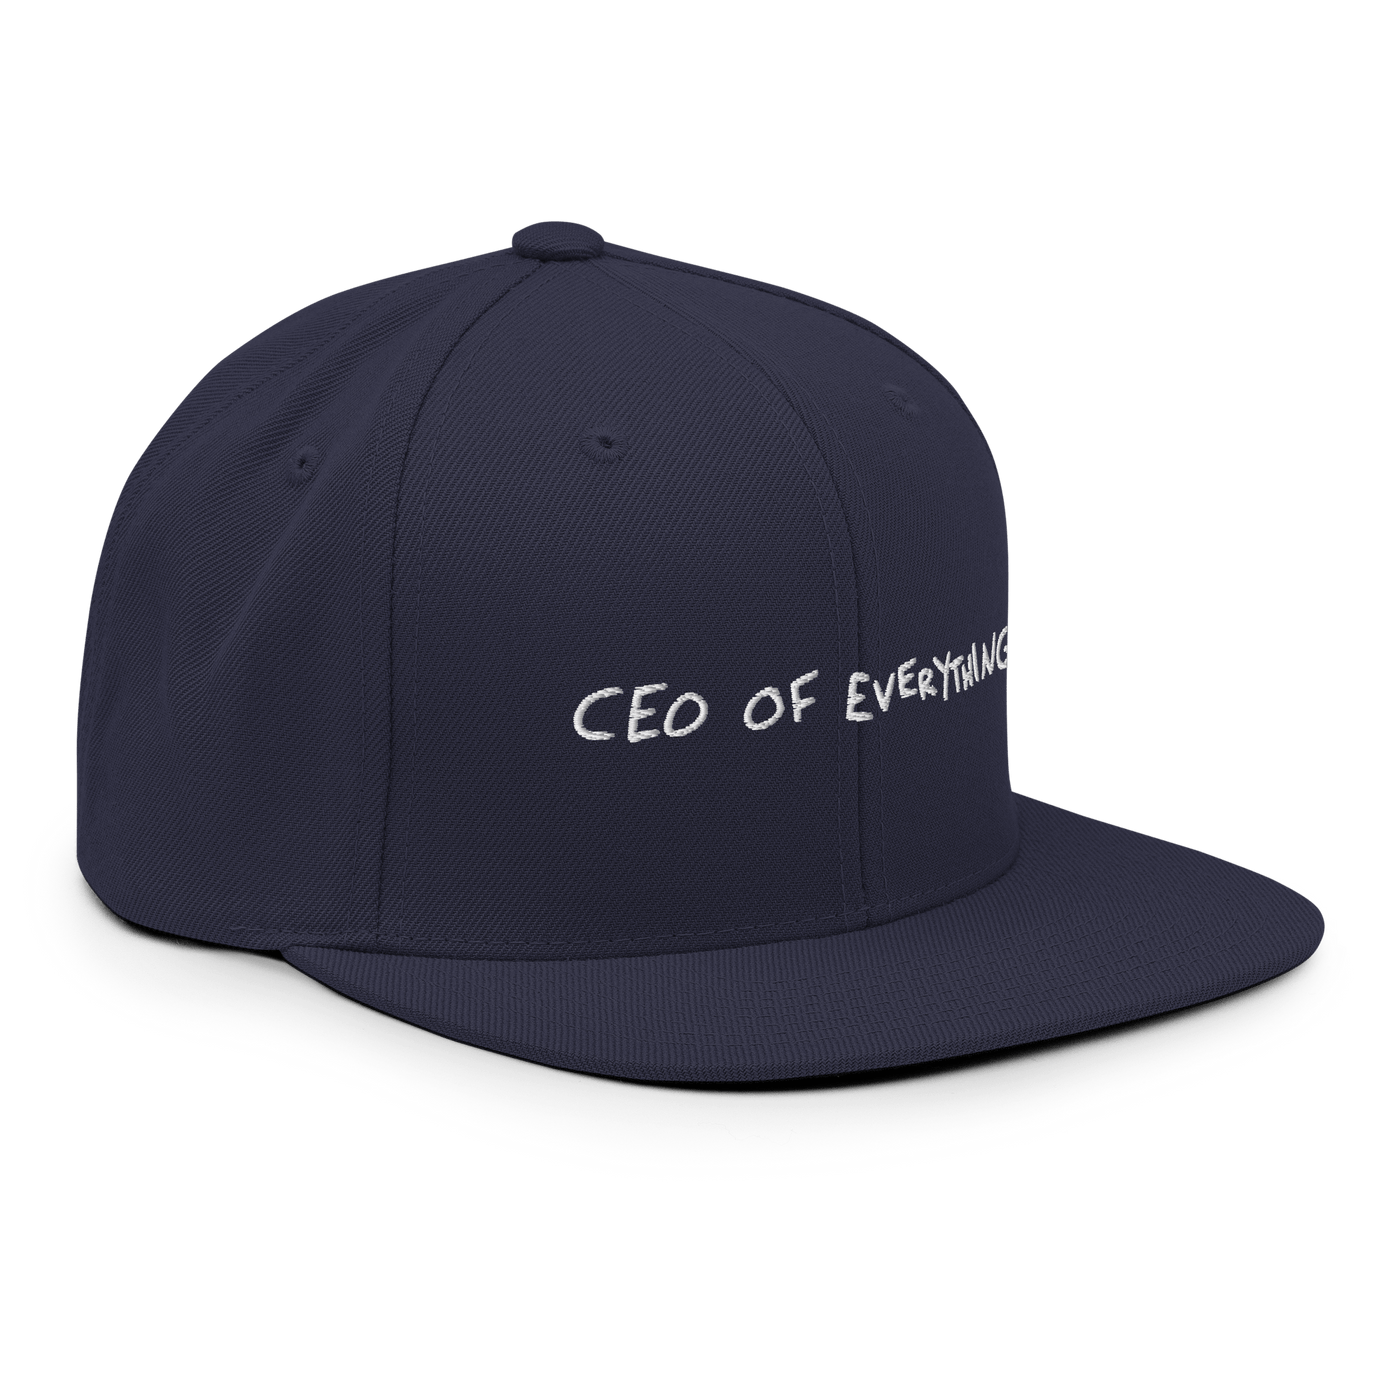 CEO of everything Snapback - Navy - - Just Another Cap Store